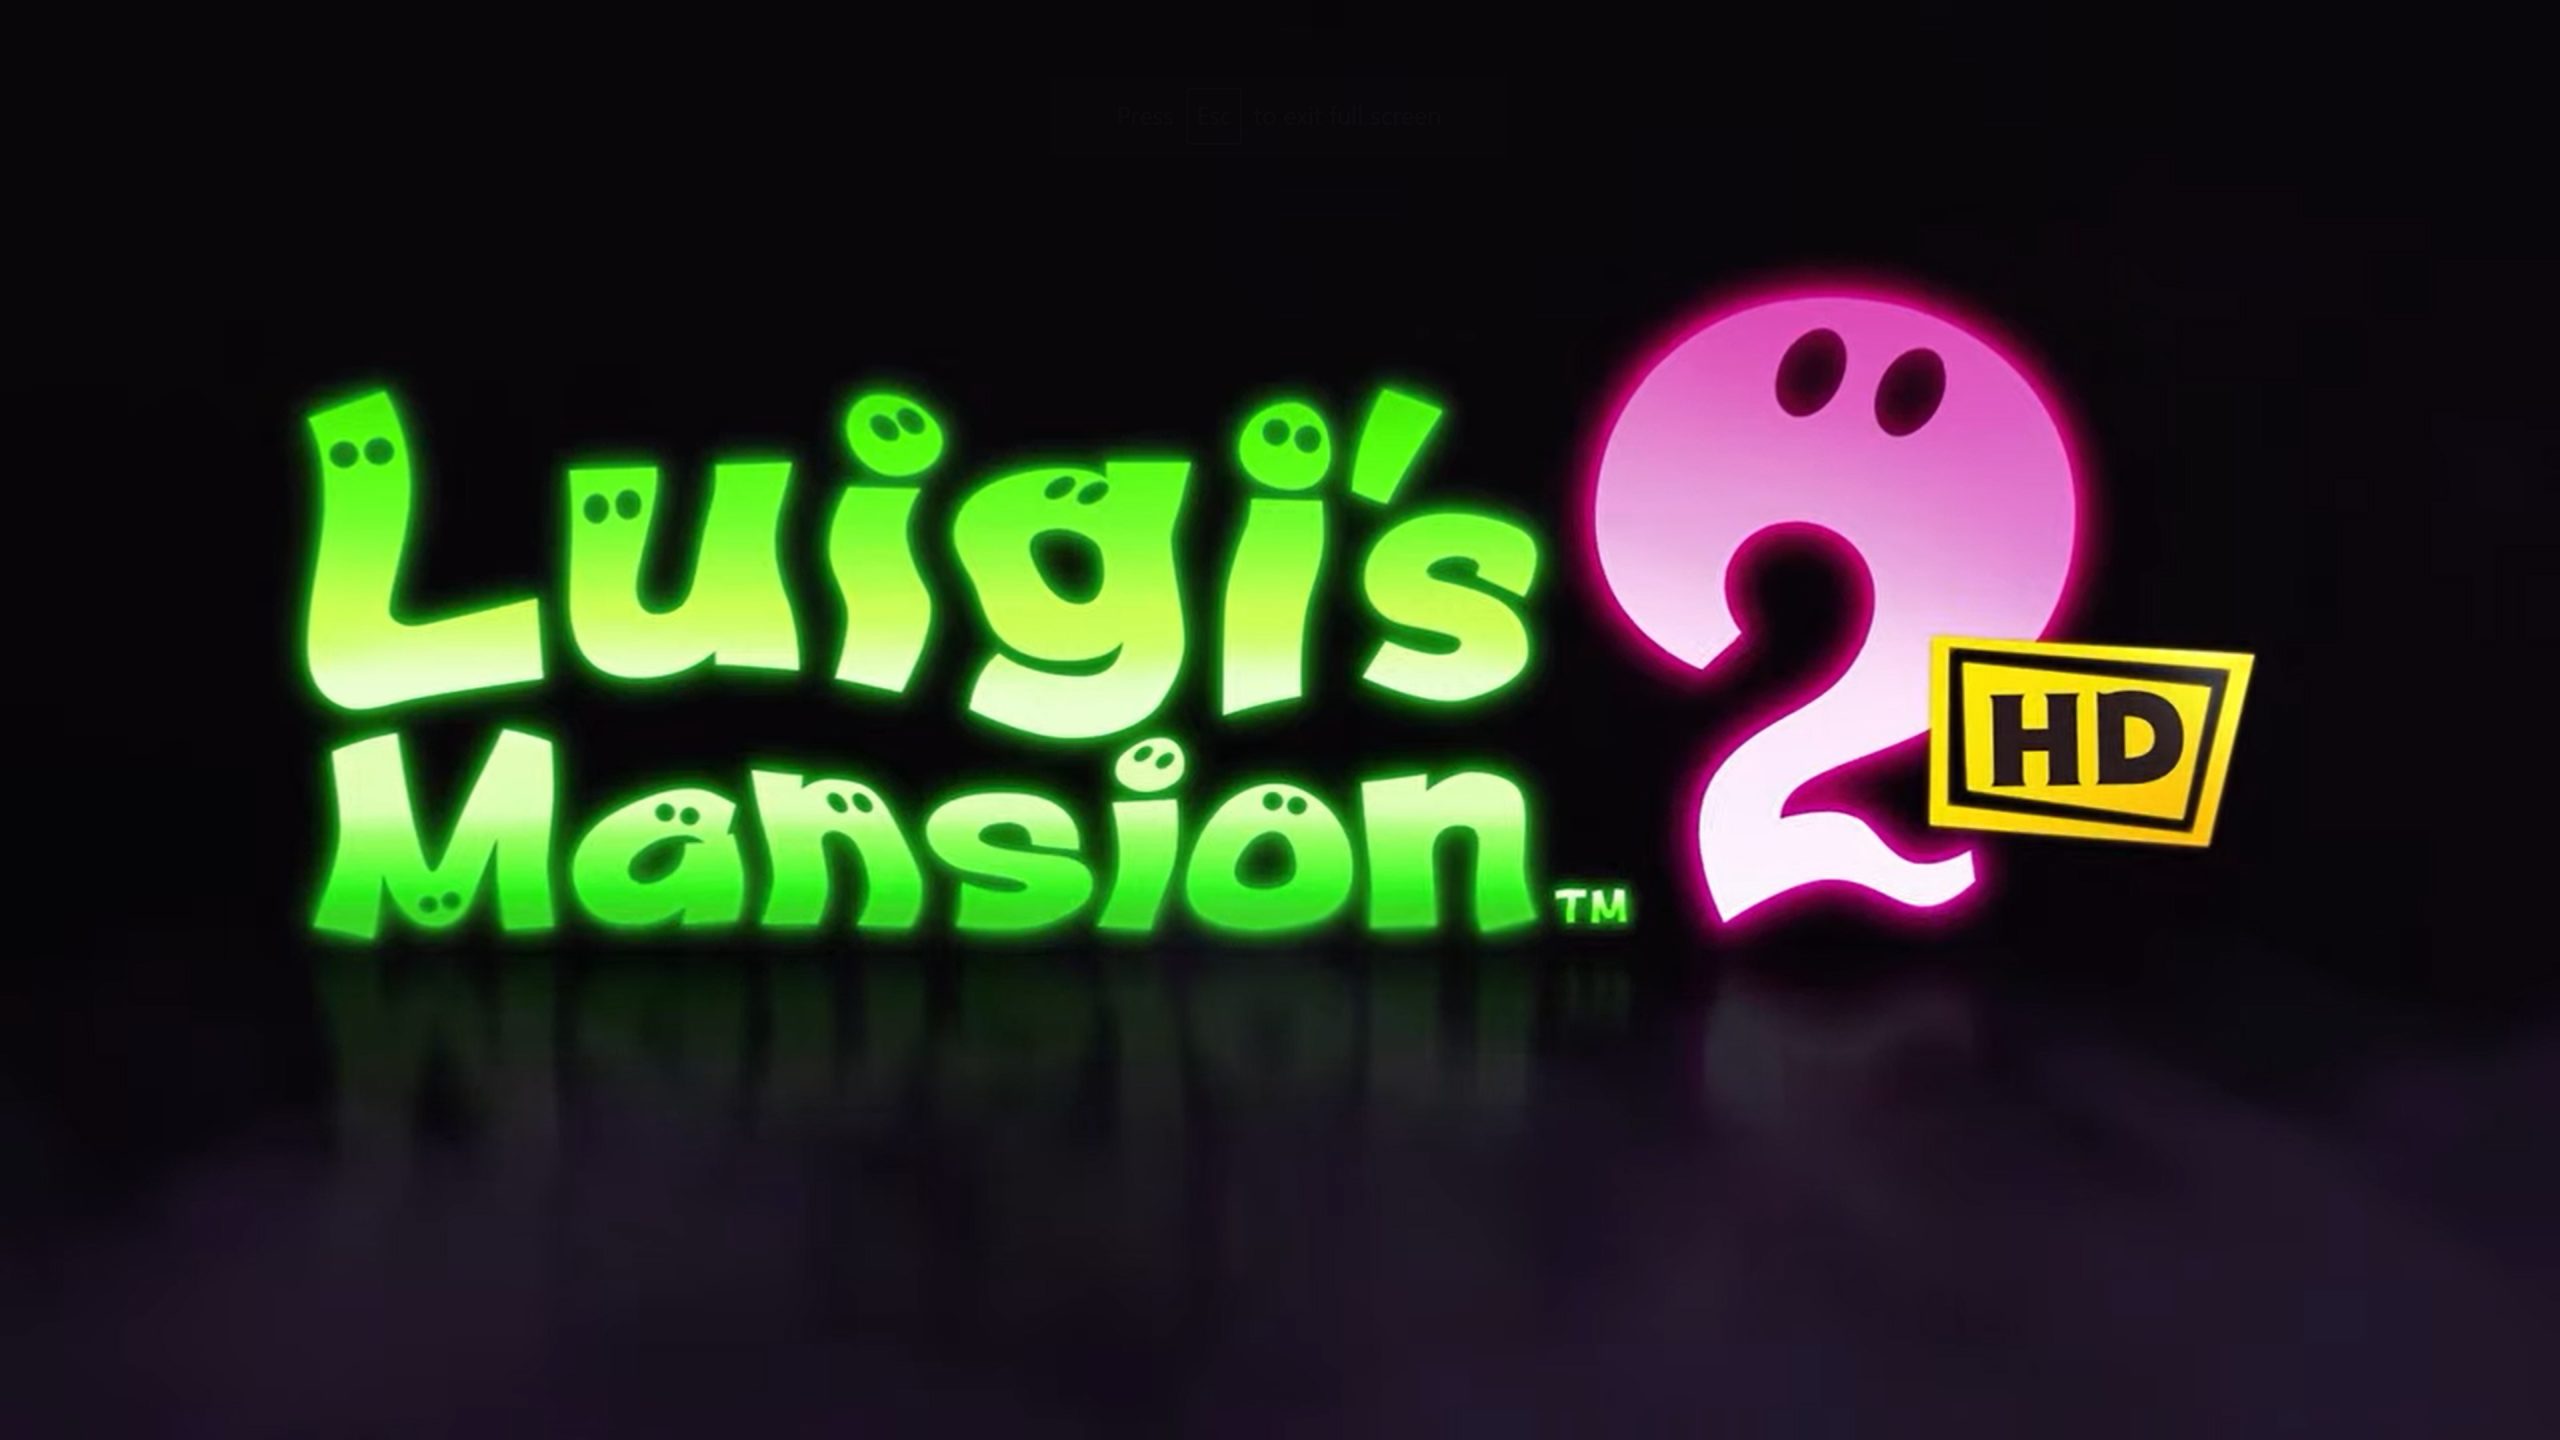 News - Nintendo Direct Announced For March 8, Luigi's Mansion